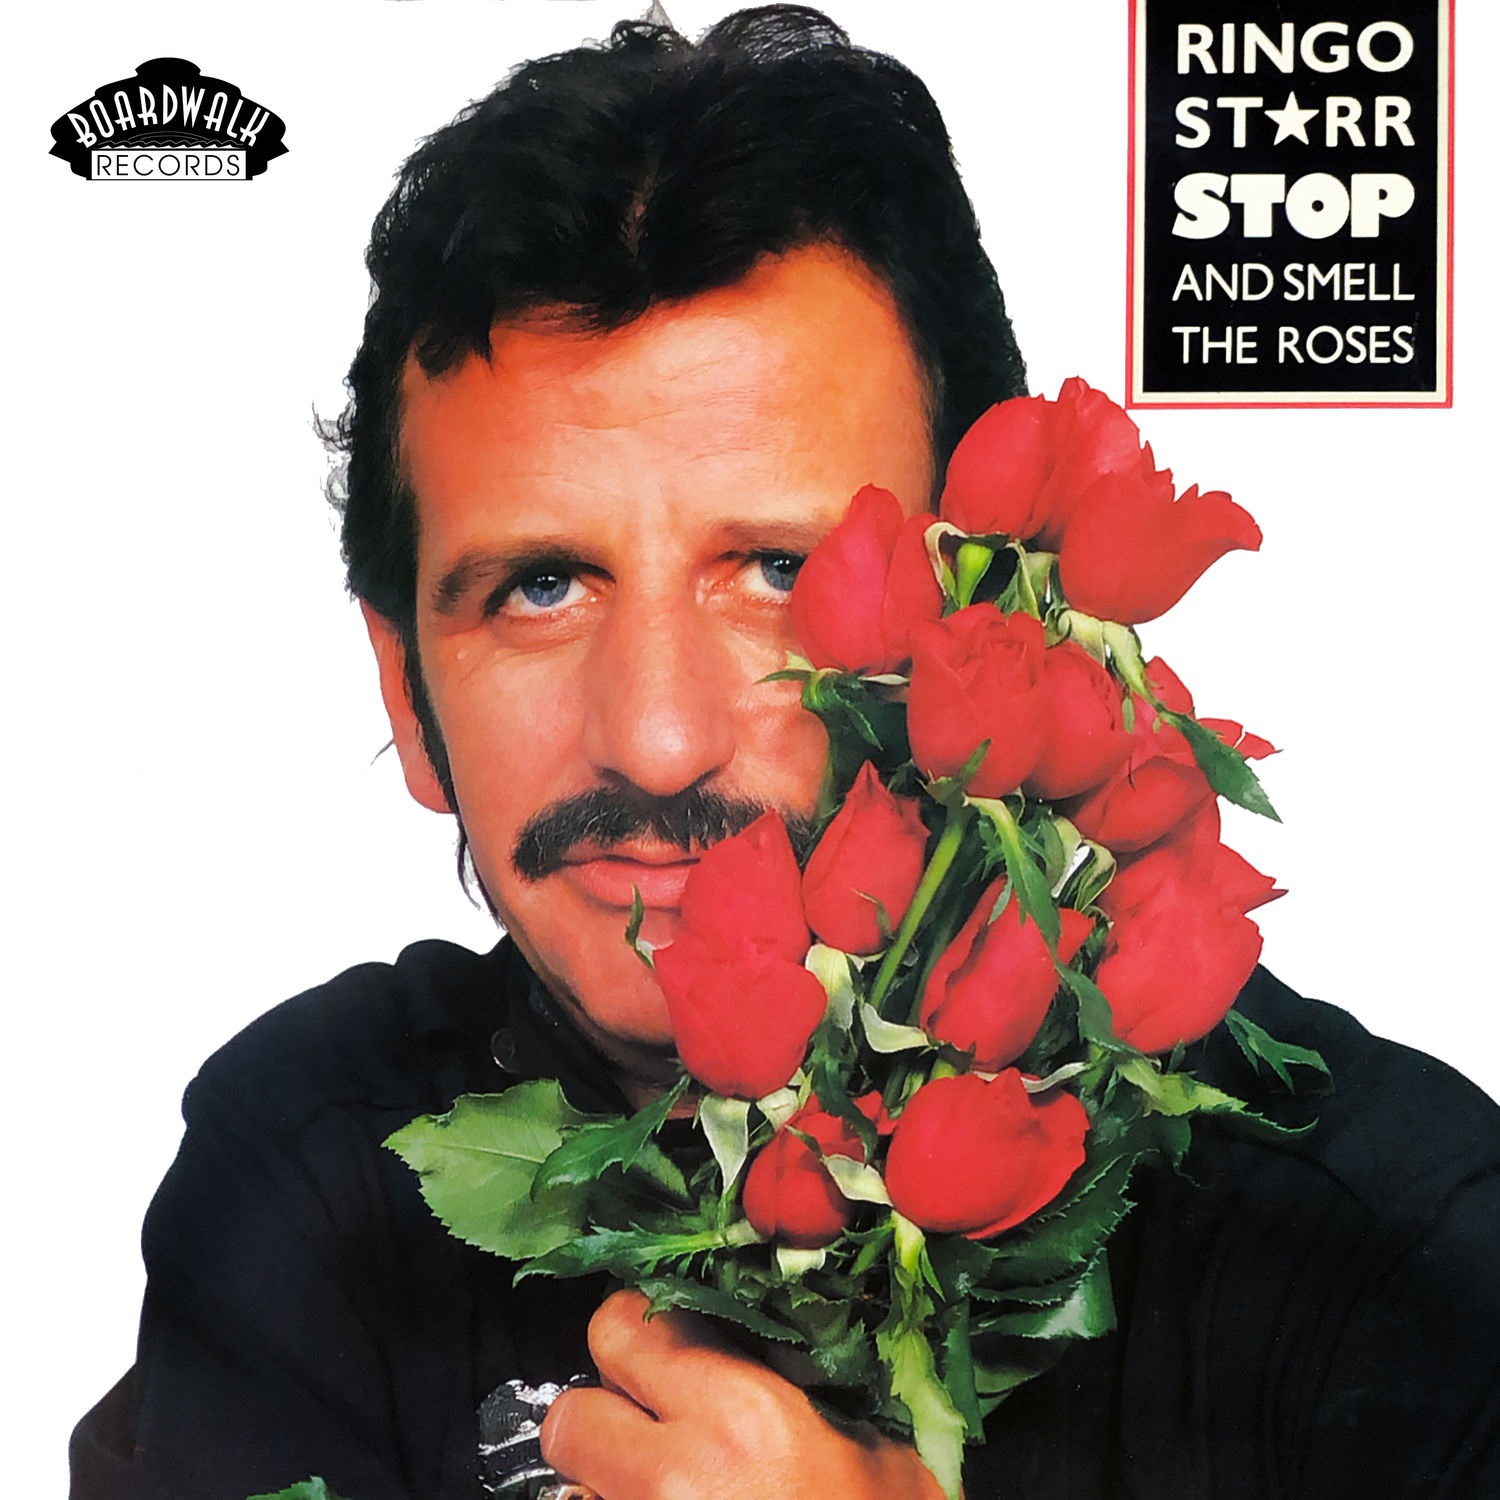 Ringo Starr - Stop and Smell the Roses (1981/2021) [FLAC 24bit/96kHz]